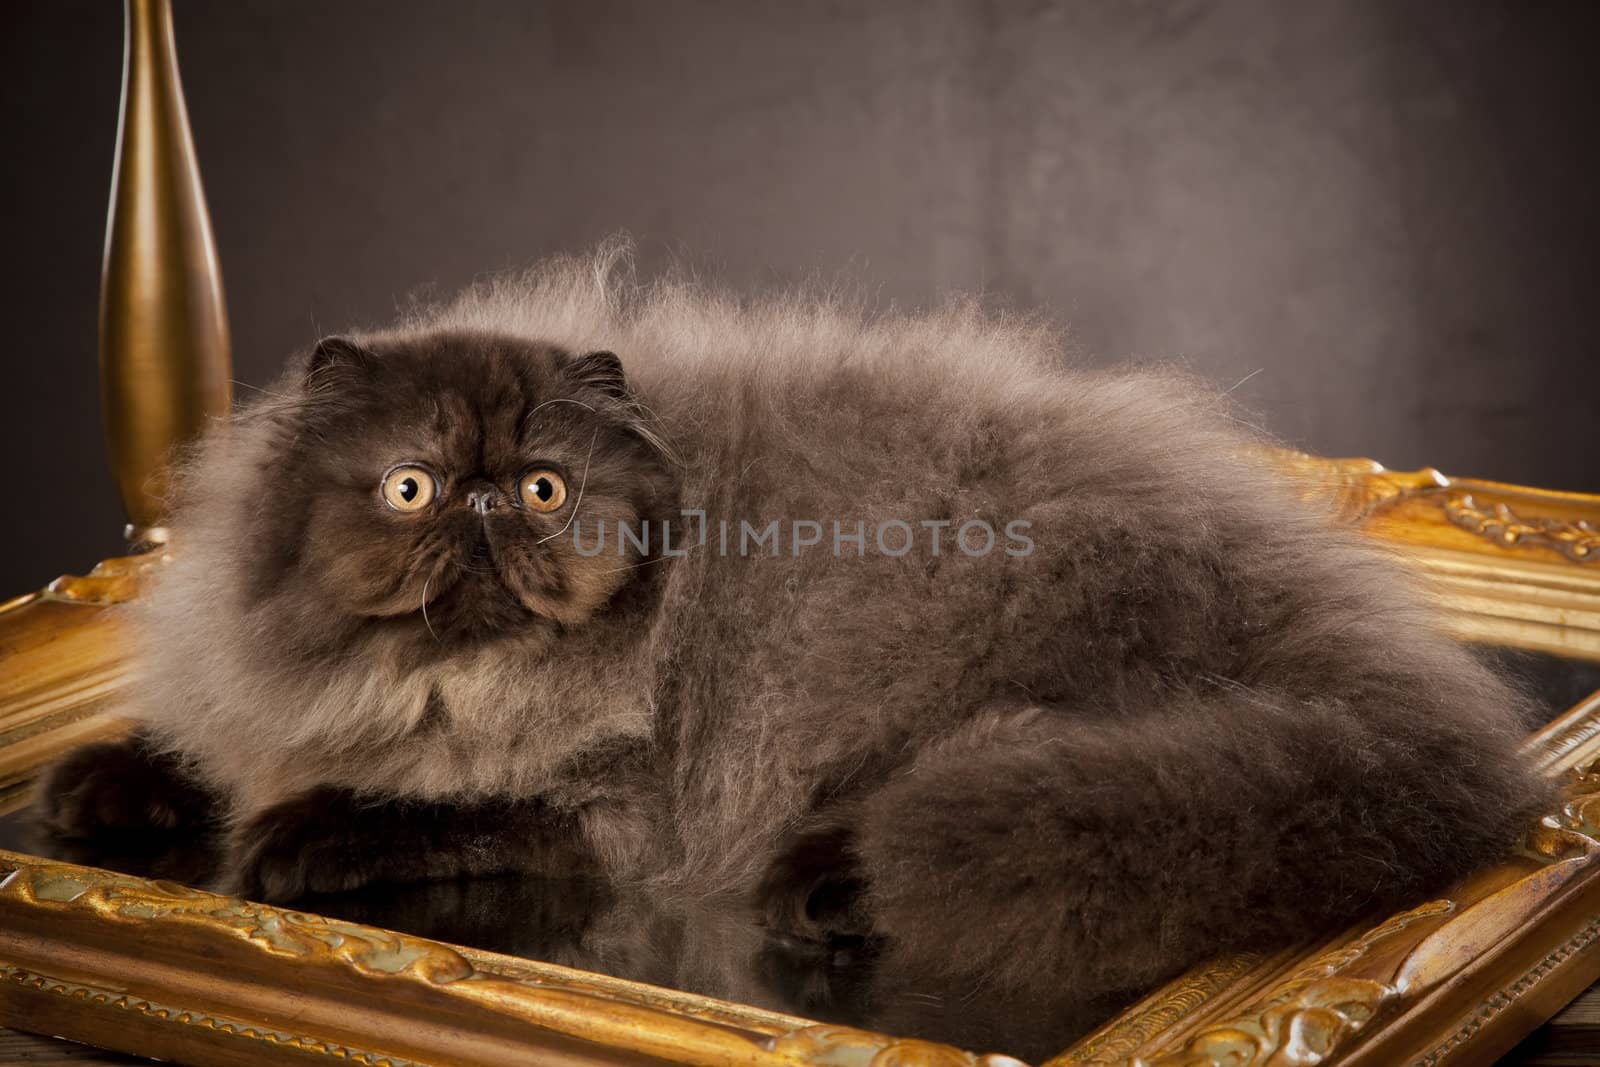 Long haired (persian) cat on the table